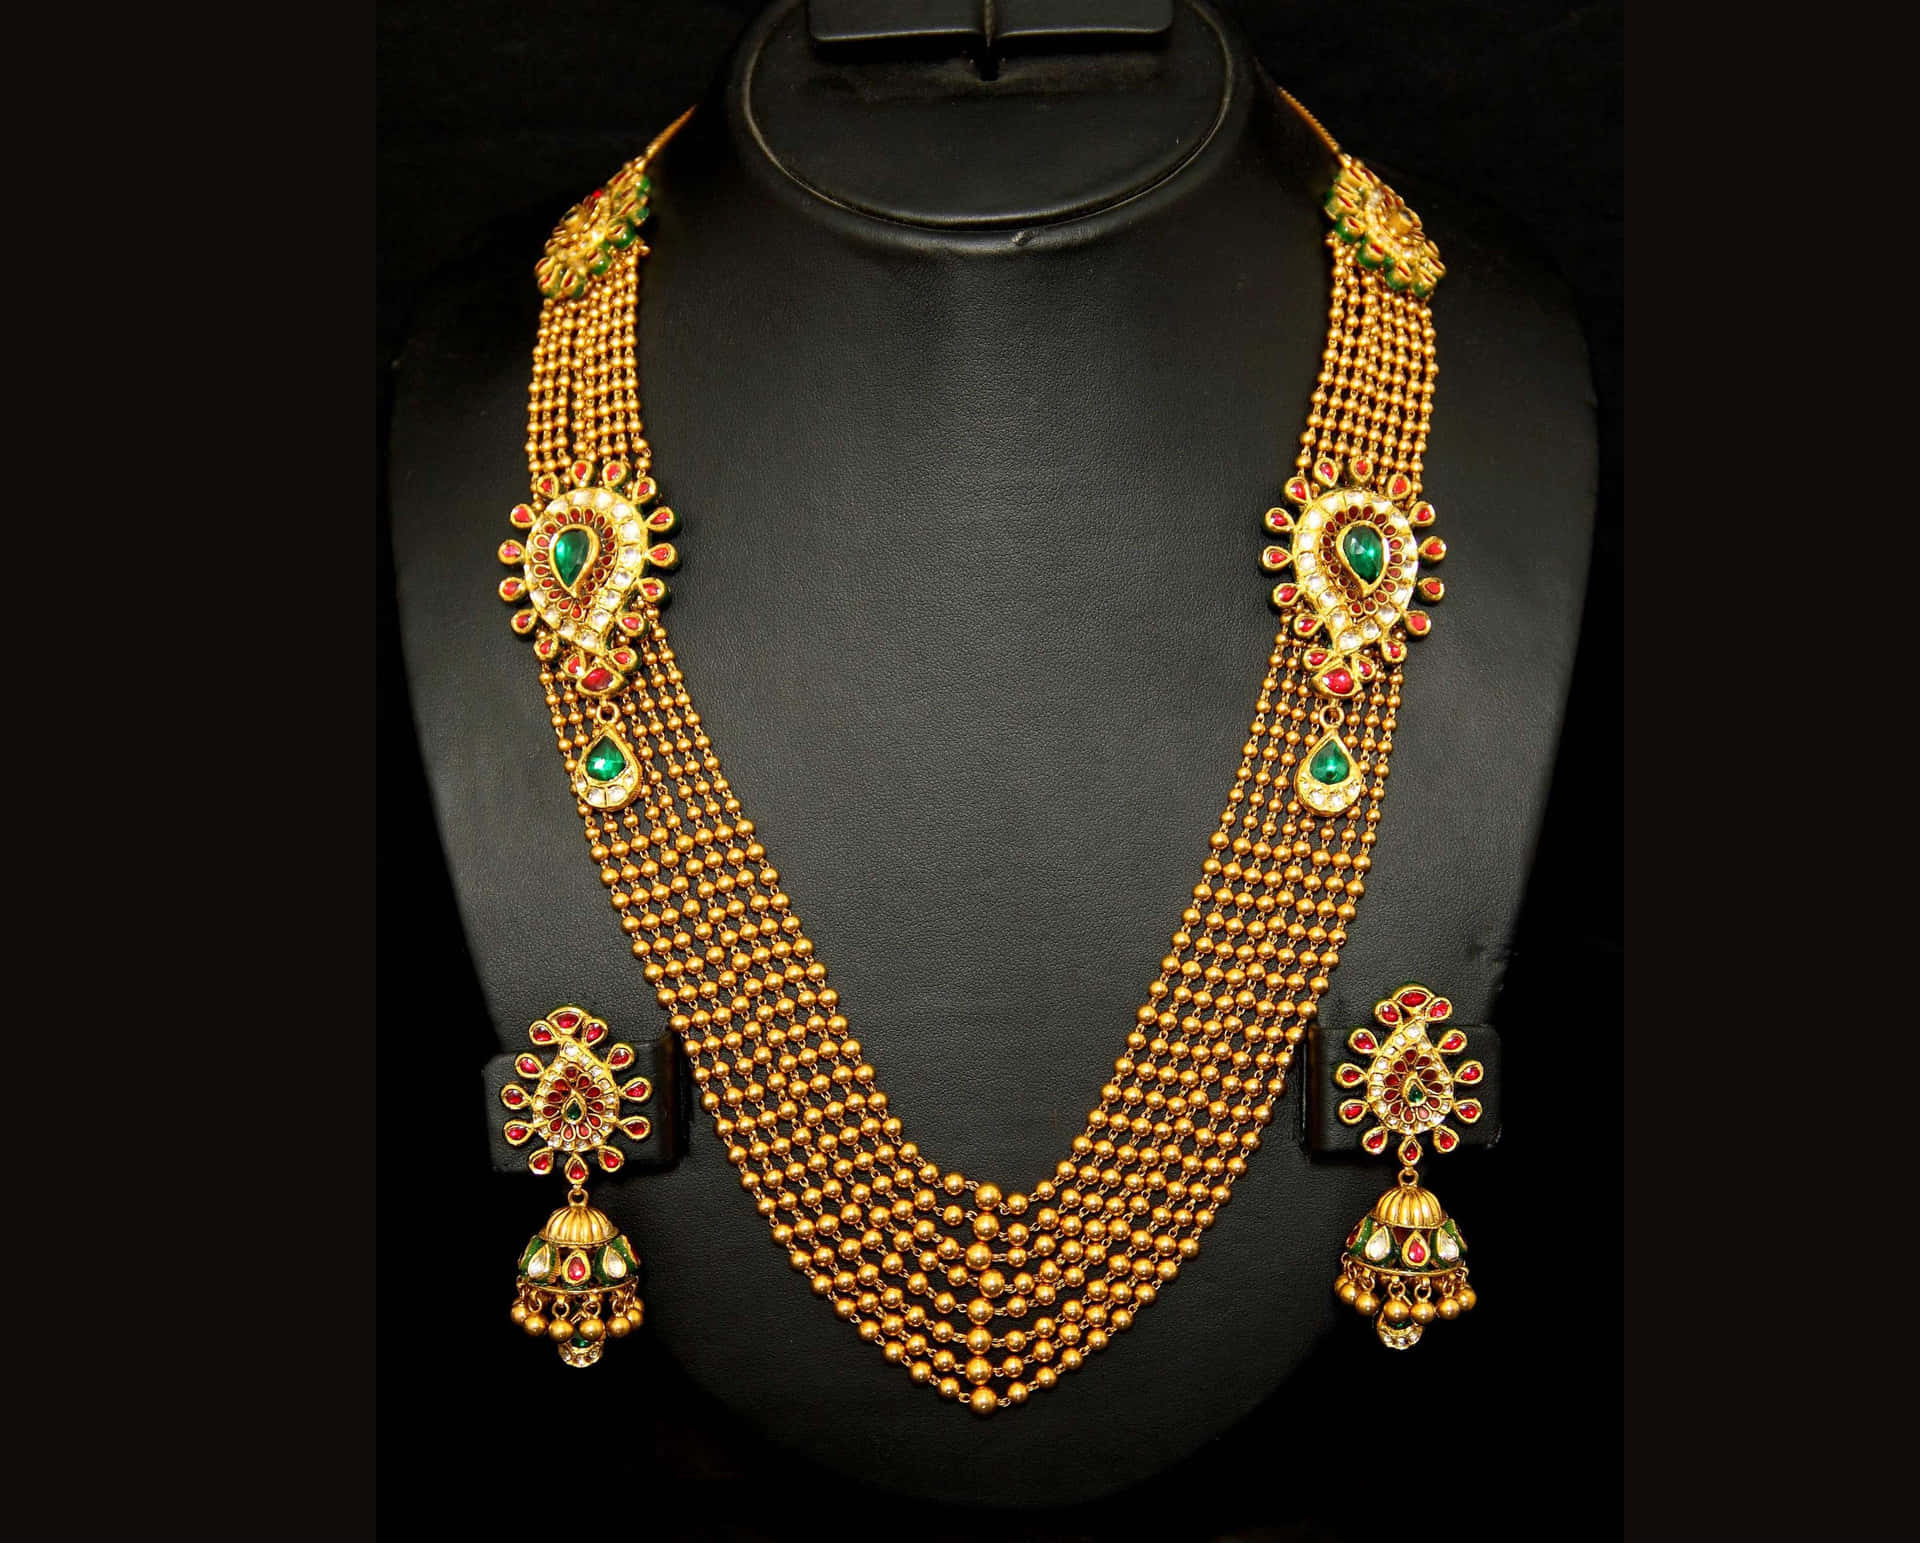 A Gold Necklace Set With Emeralds And Emeralds Wallpaper